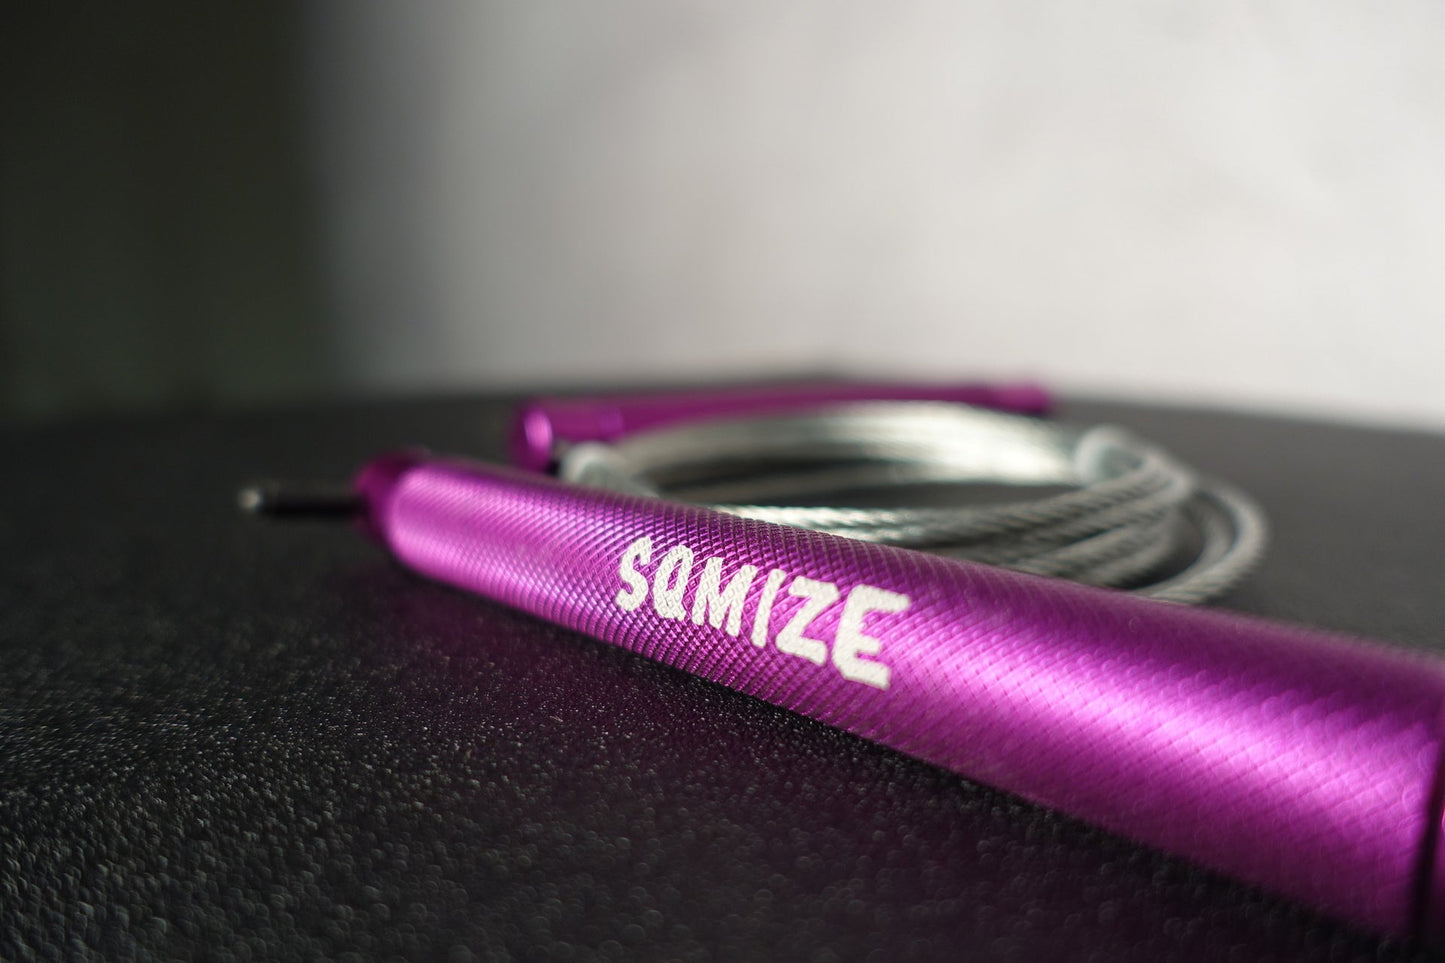 Heavy Jump Rope SQMIZE® SRS Training Stainless Steel, Purple Edition - SQMIZE Nederland